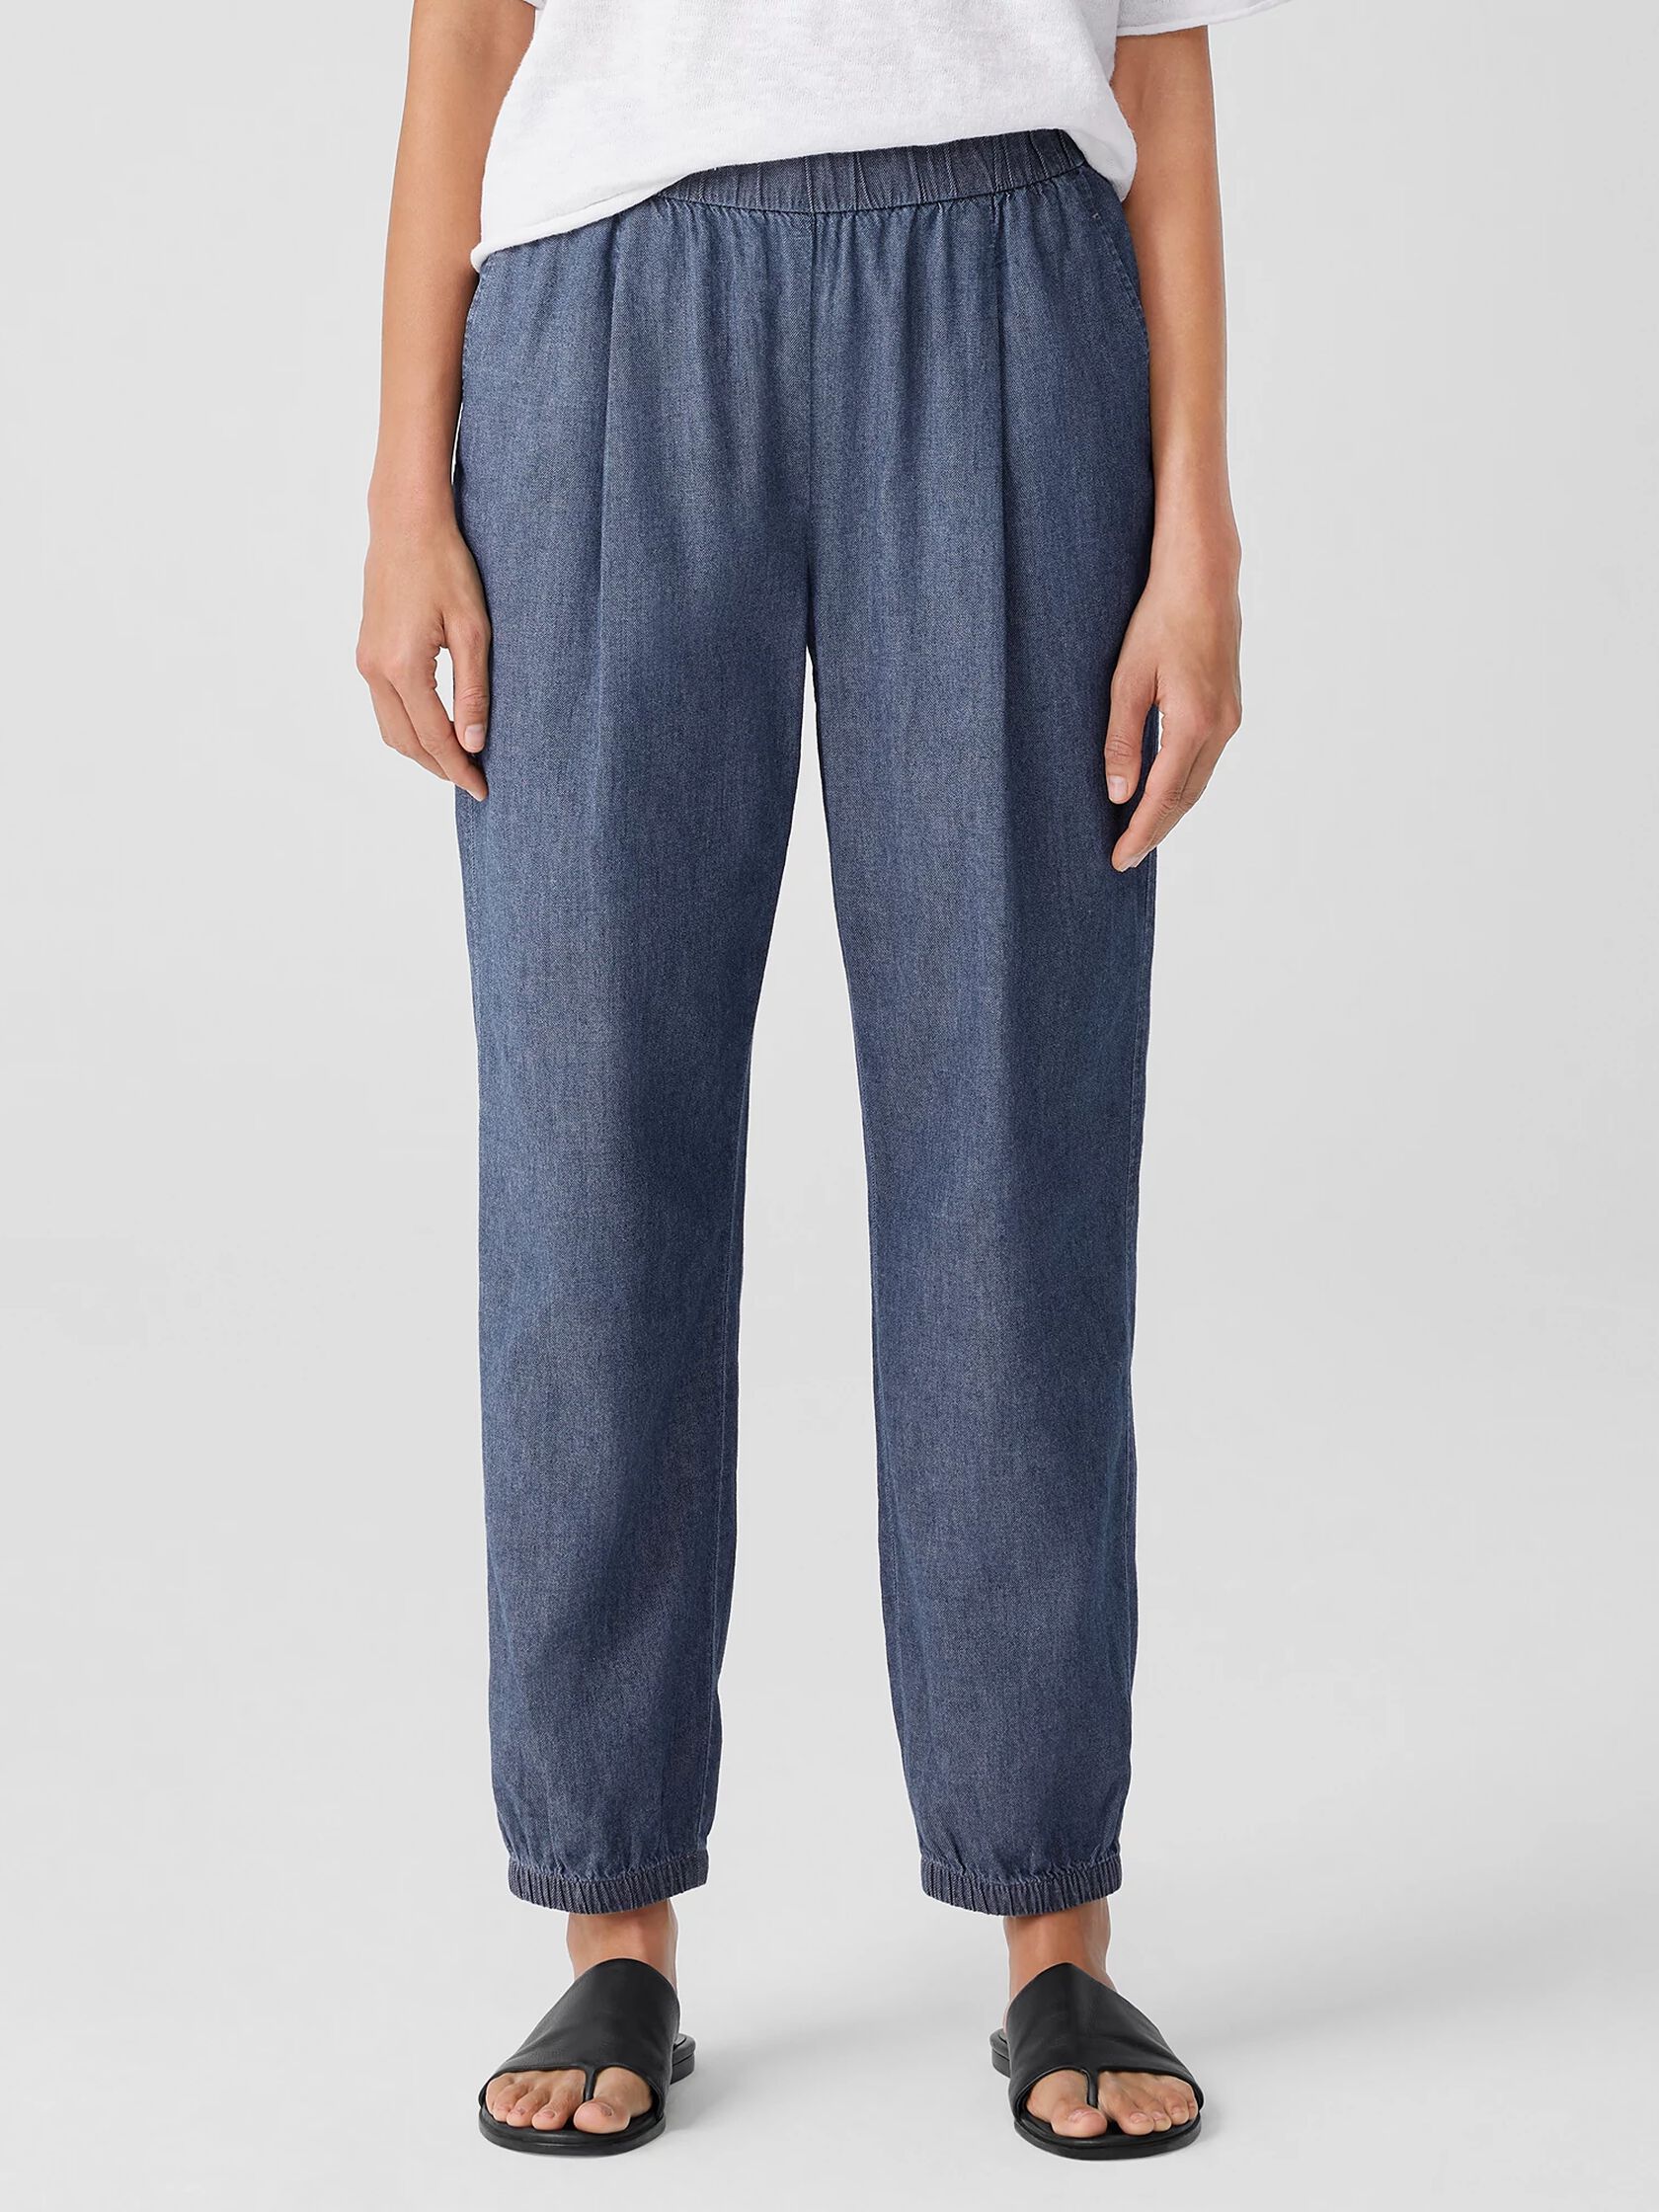 Airy Organic Cotton Twill Jogger Pant | EILEEN FISHER